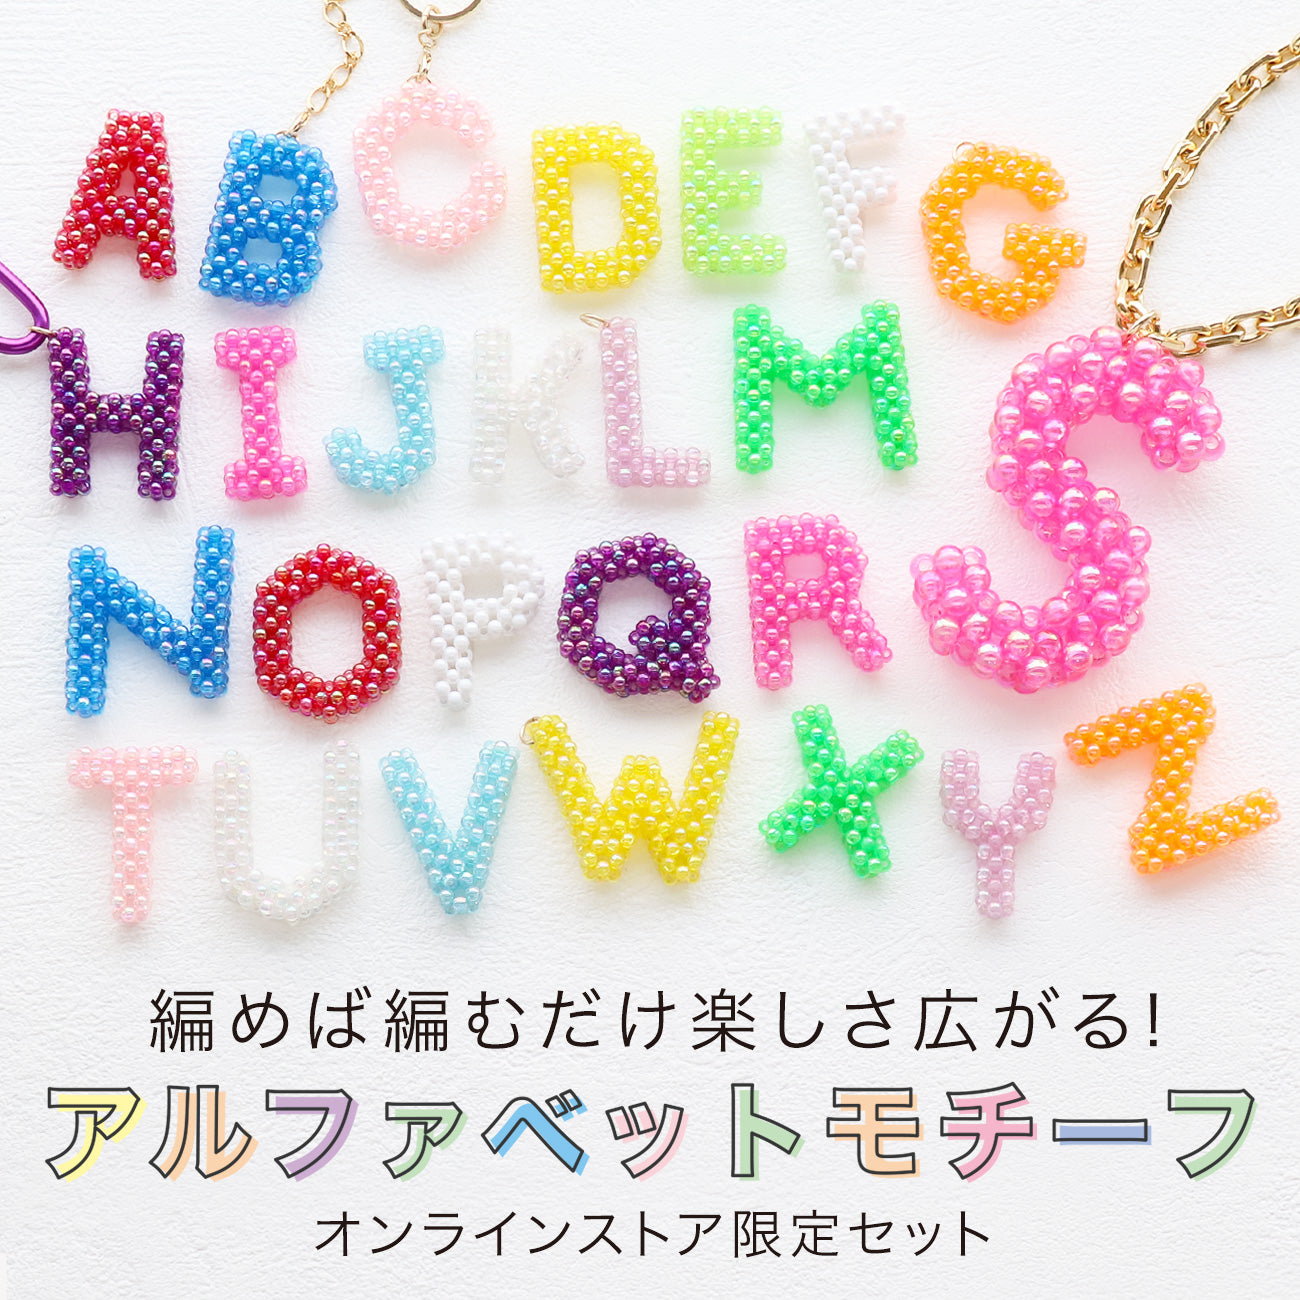 If you knit it, it's fun just to knit! Alphabet motif online store limited